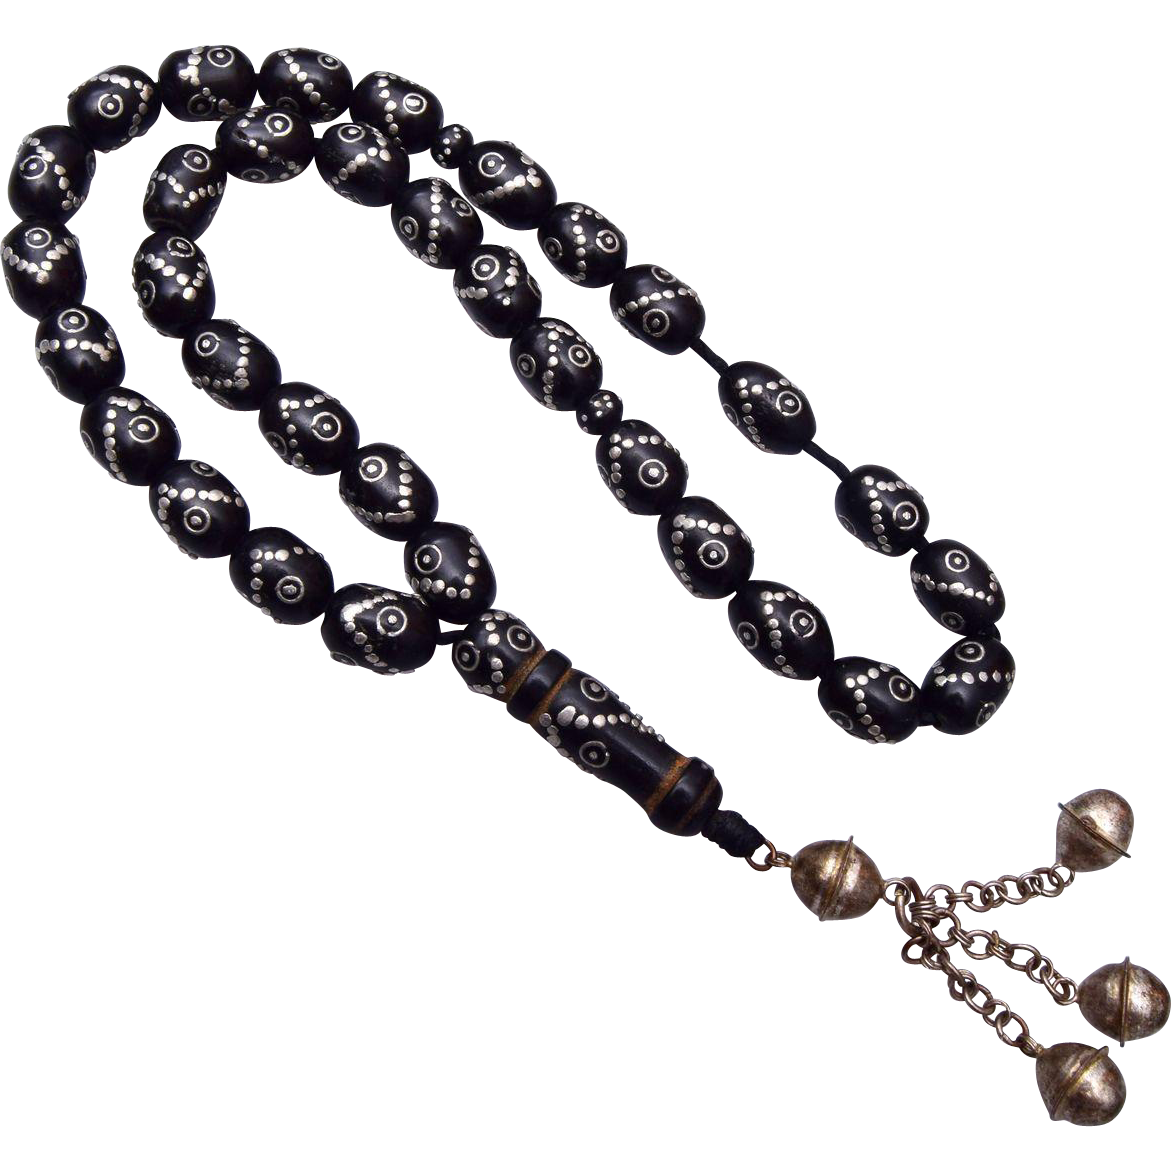 Beads PNG High Quality Image